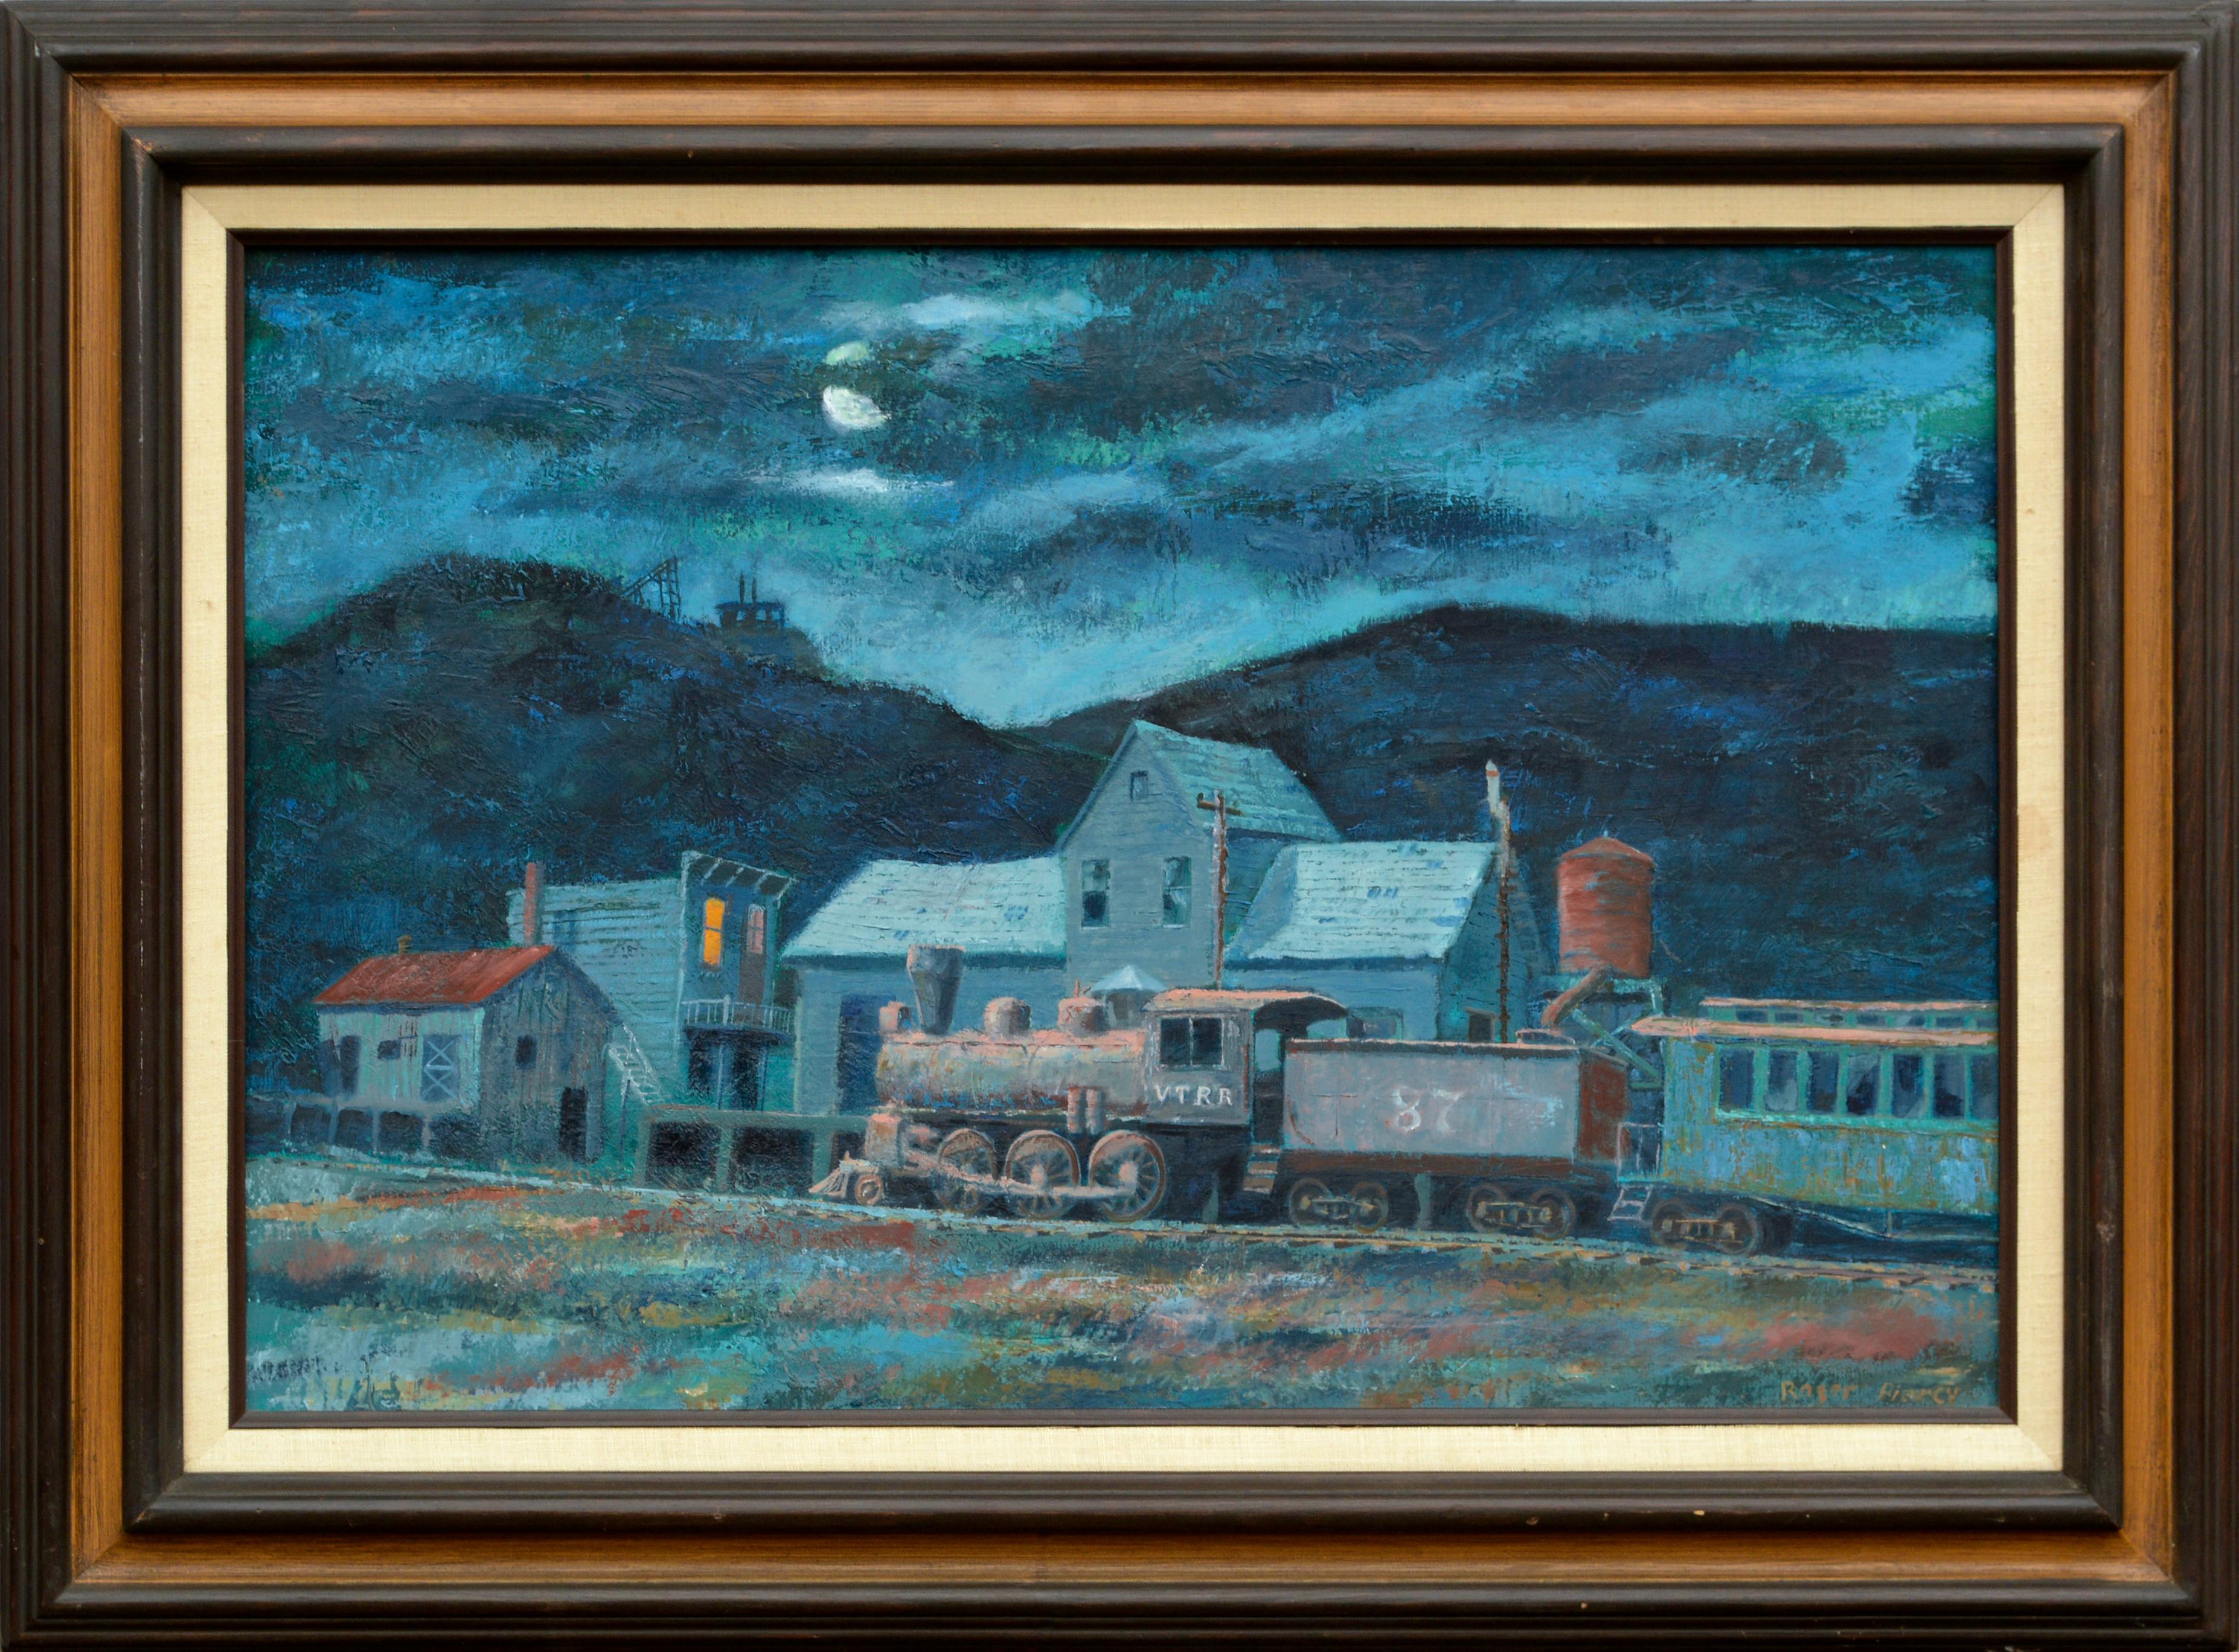 Roger Piercy Landscape Painting - "Last Run to Silver City" - Nocturnal Railroad Landscape with Steam Train 